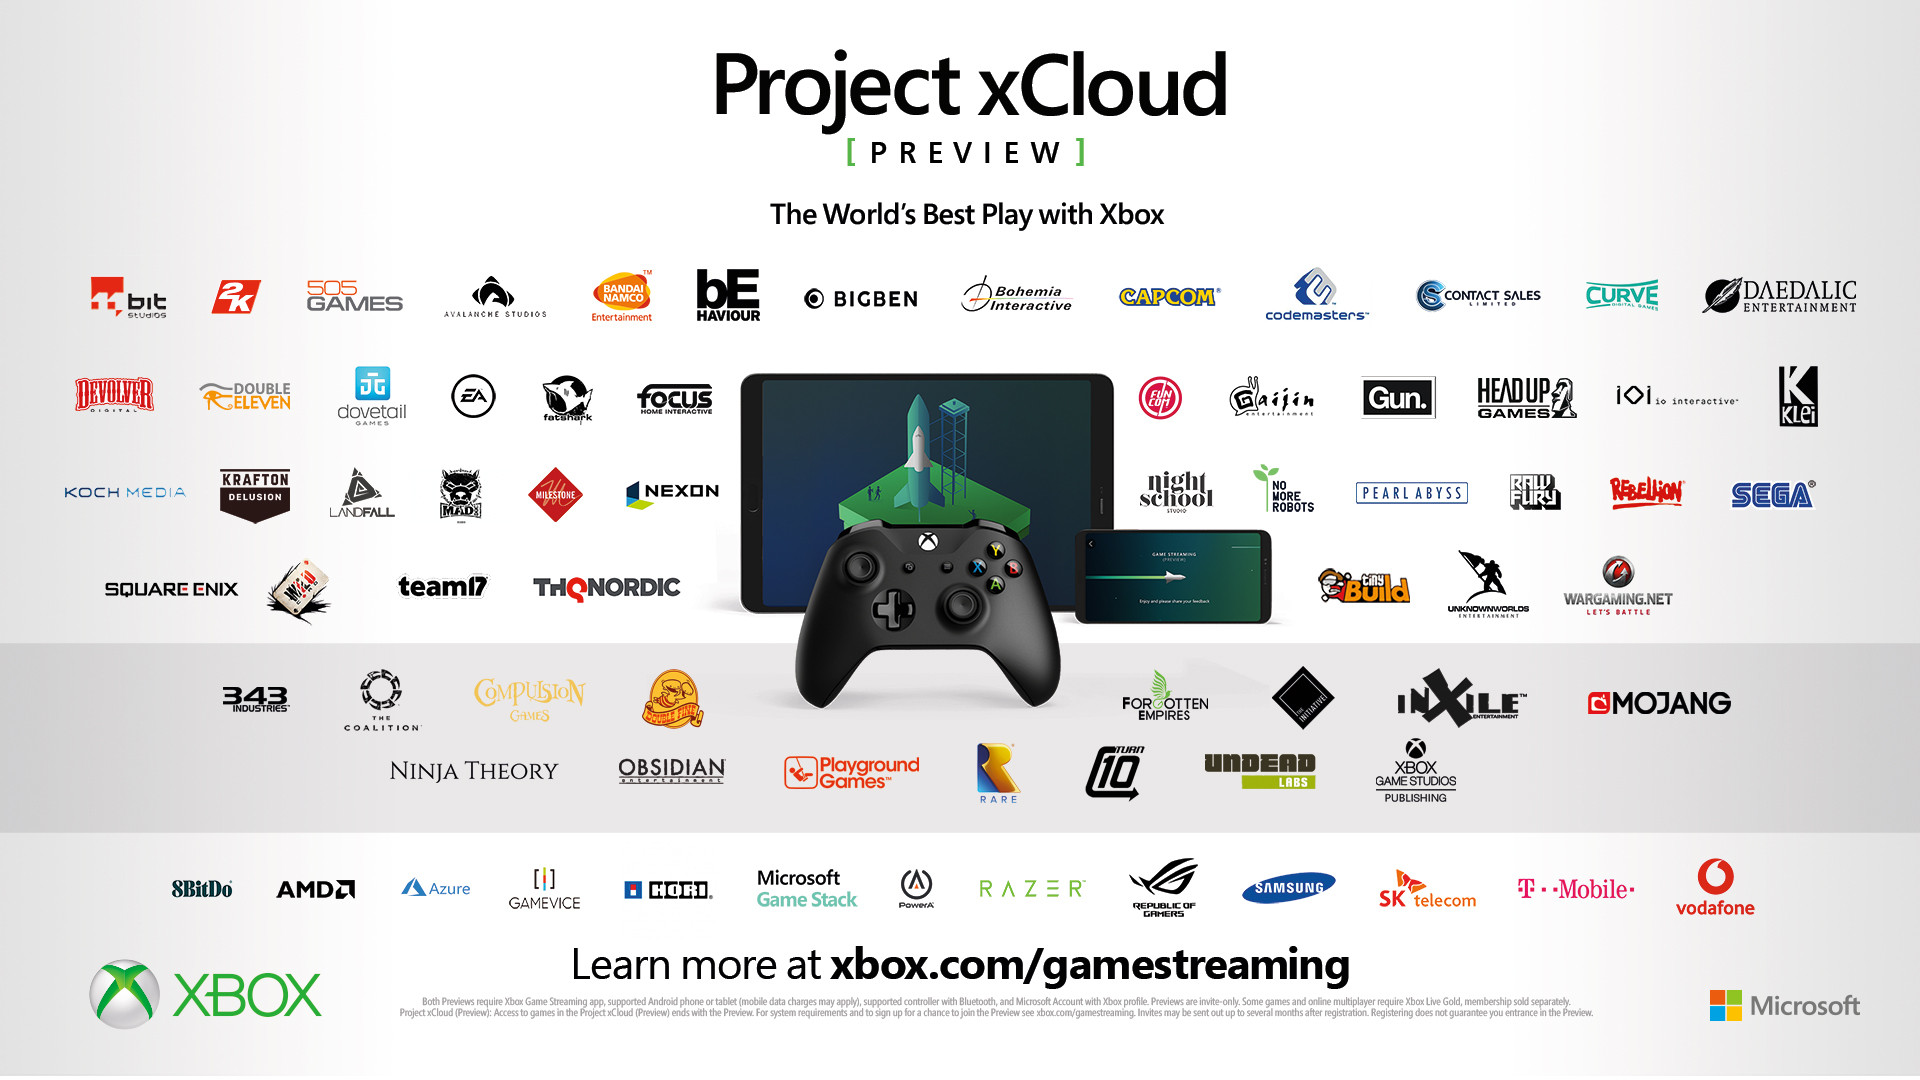 Project xCloud Gets More Games and Additional Accessory Support; Preview In More Countries Set for 2020